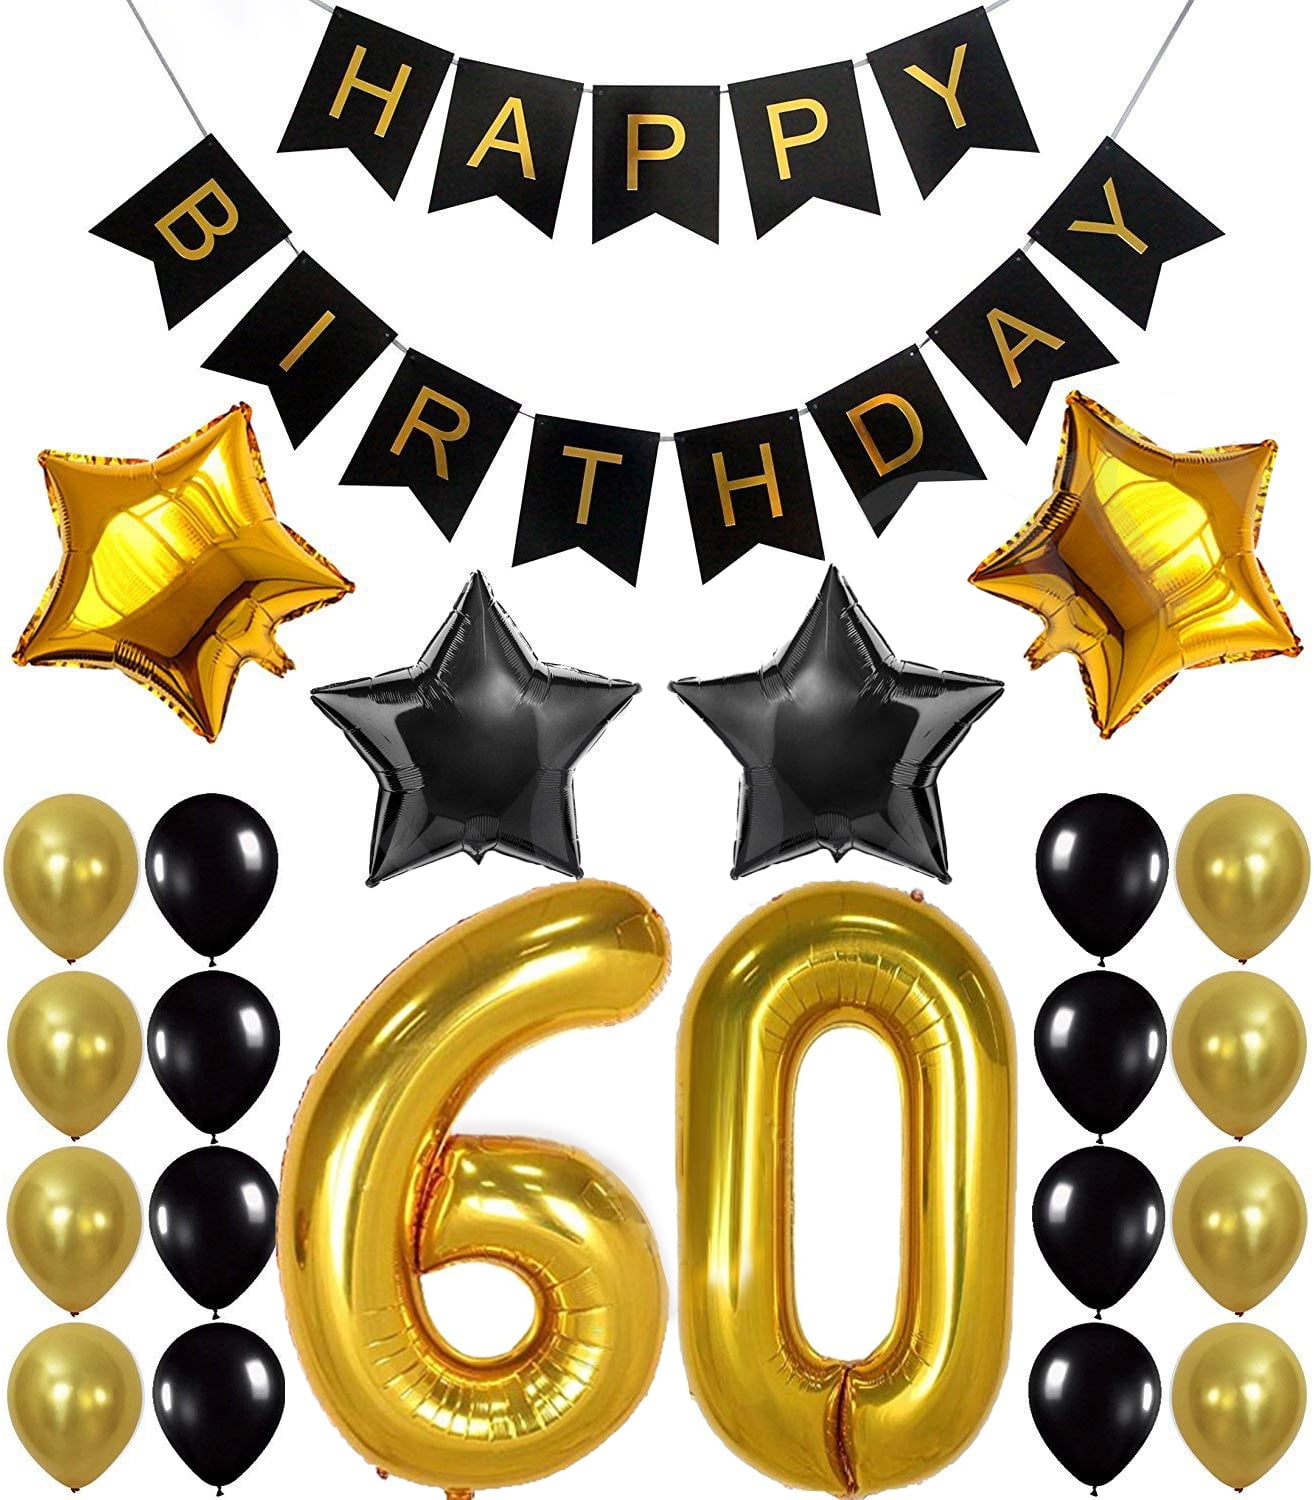 60th Birthday Decorations Kit - Gold Black and White Color